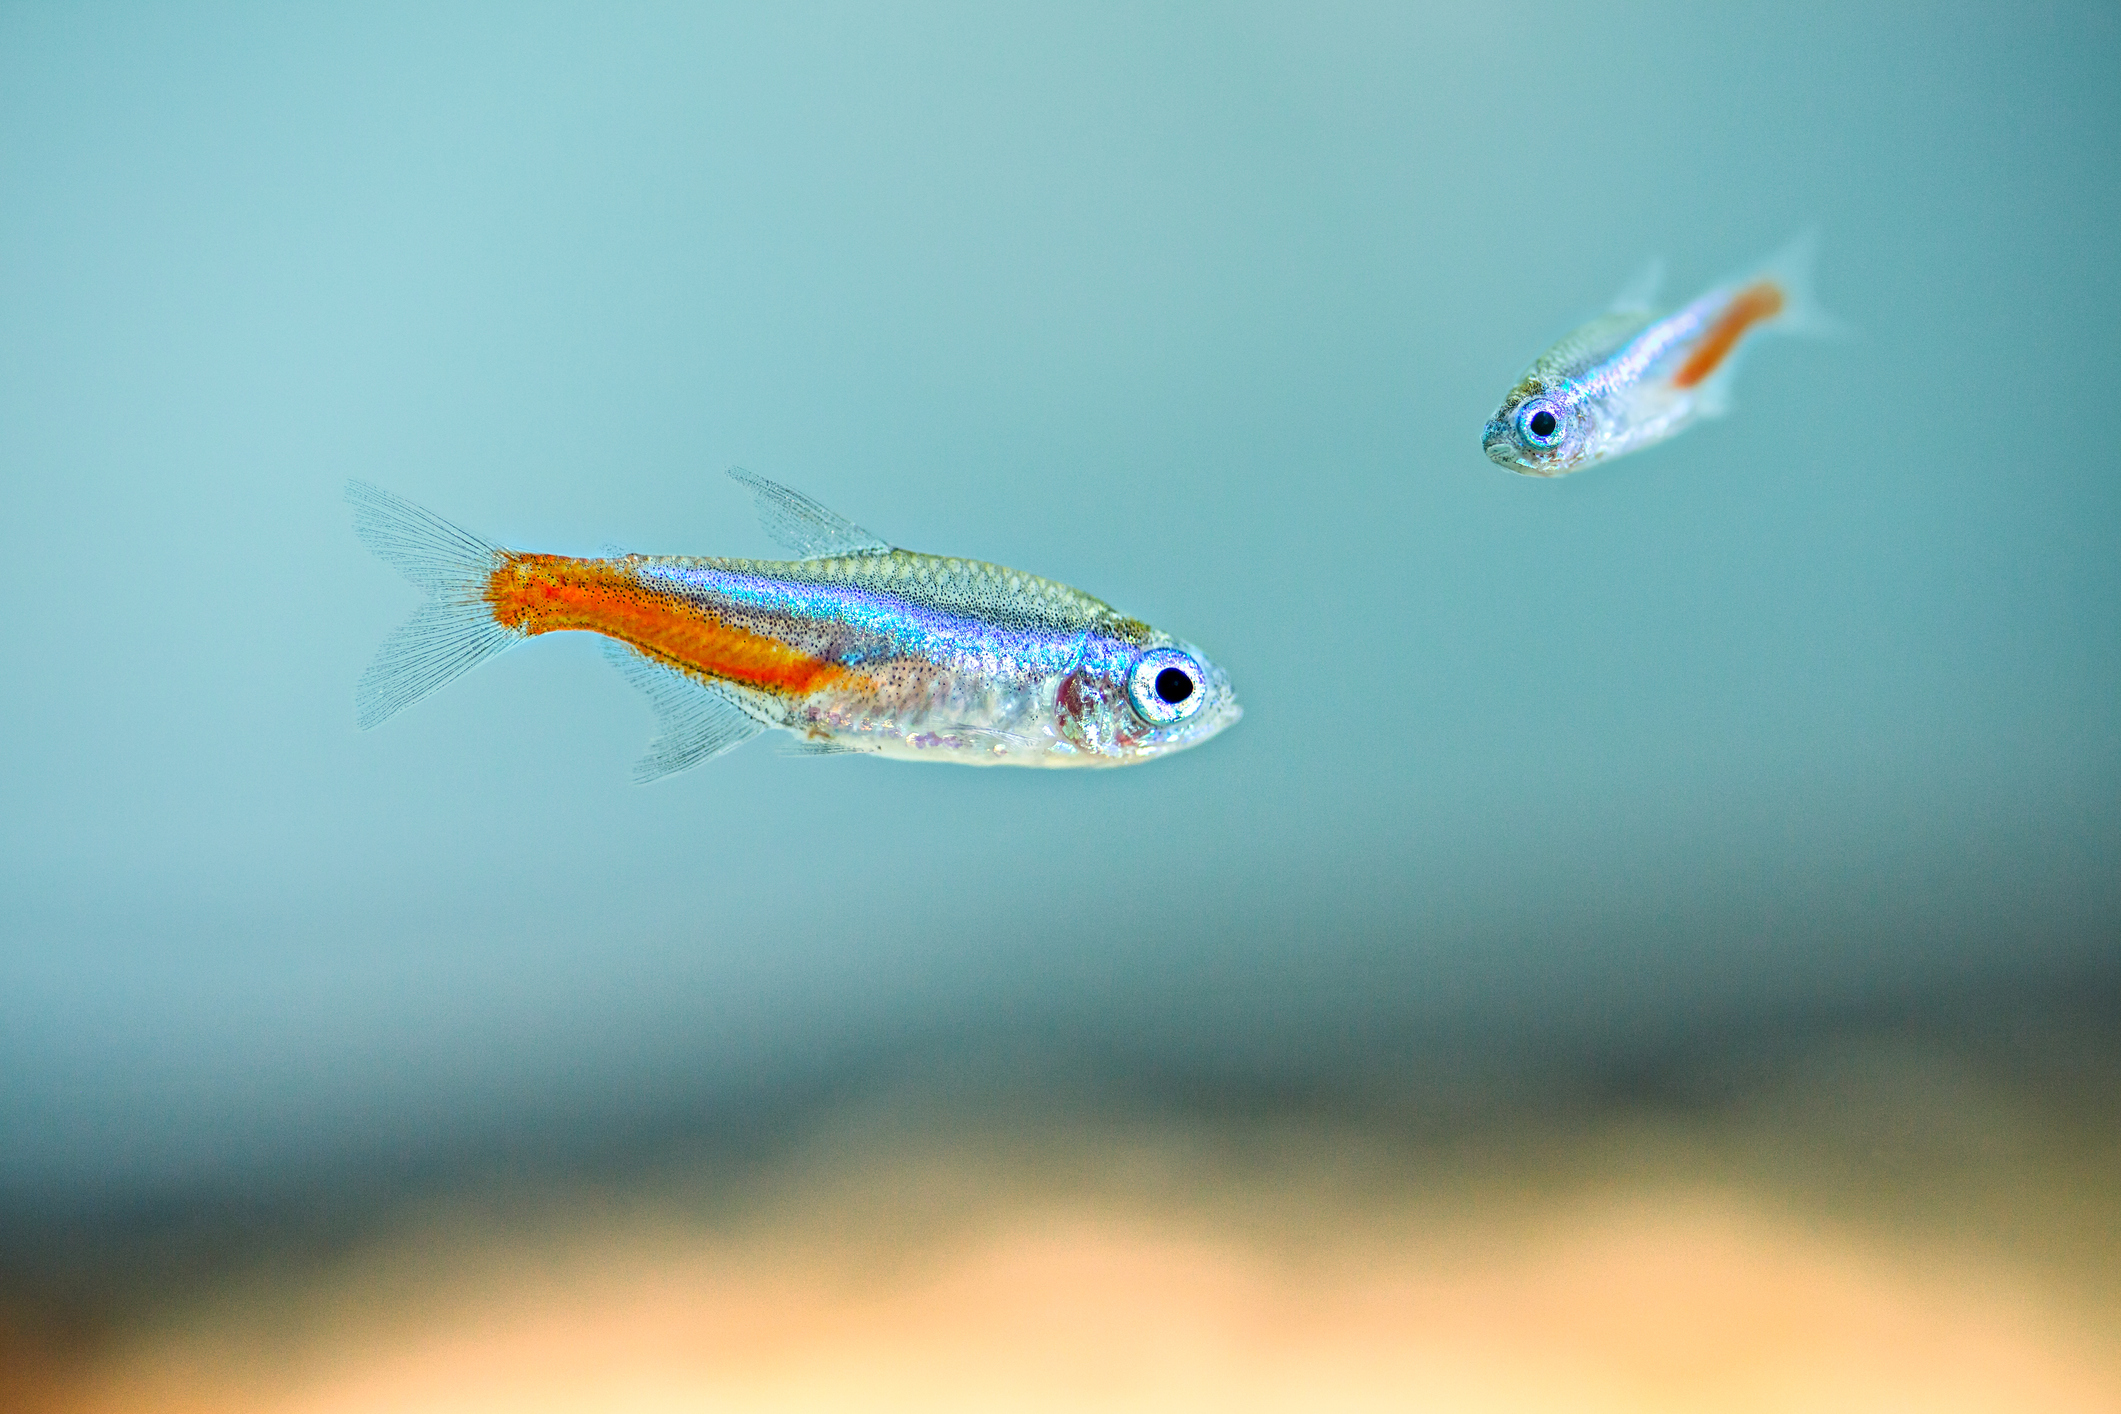 <p>  <a href="https://www.aquariumsource.com/types-of-tetras/">Tetras</a> are freshwater fish that are not only vibrant and captivating with their schooling antics but also delightfully low-maintenance. They’re perfect for both newbie and experienced aquarium enthusiasts. Tetras are quite adaptable with varied water conditions, too. This makes upkeep super simple. And, their relaxed personality ensures they’ll get along well with other tank mates. Just make sure you have room for a school — these social fish do best in groups of at least six tetras per tank. </p>